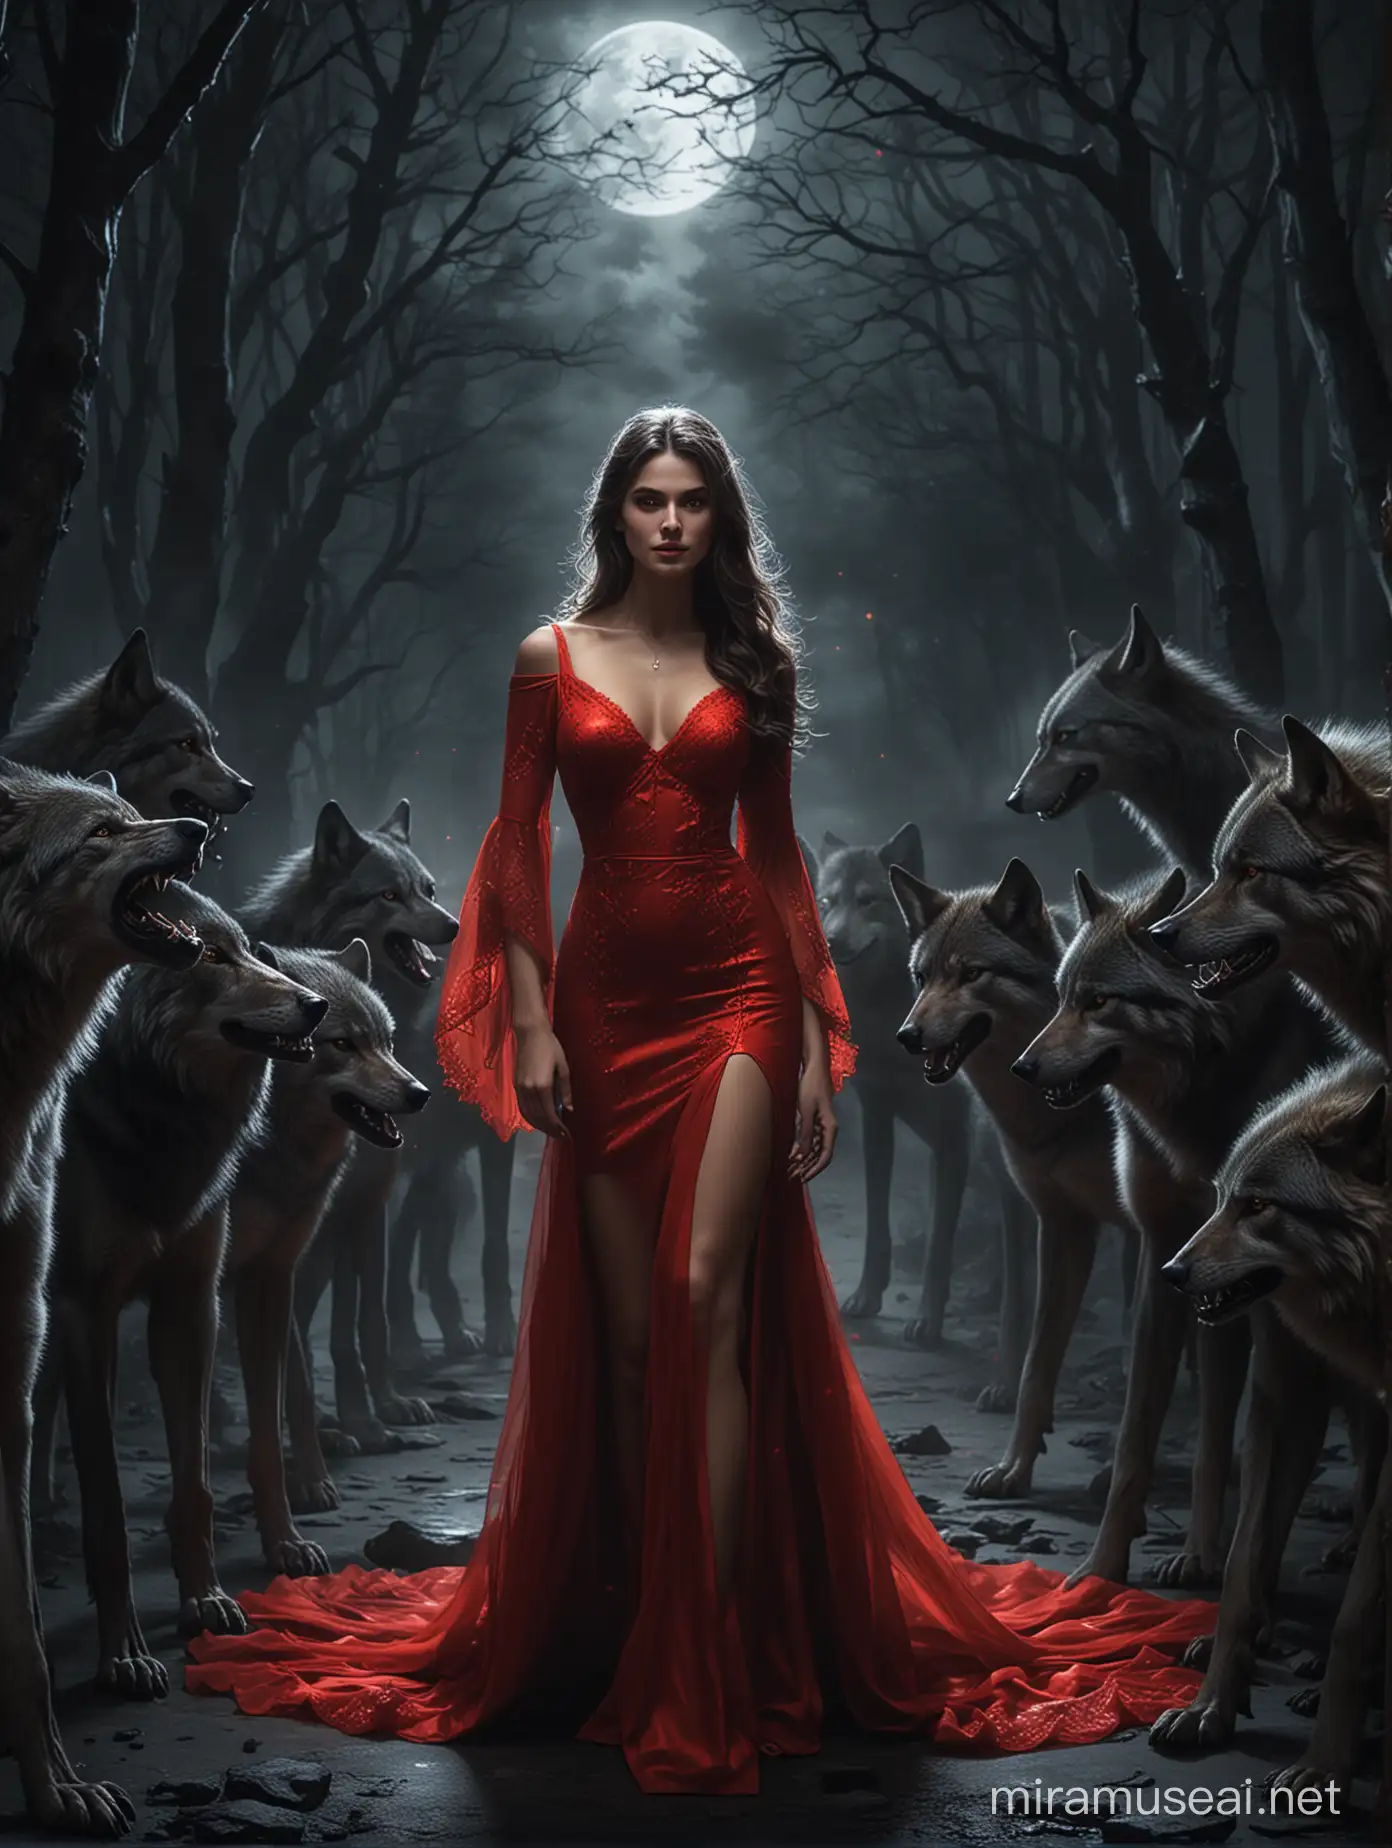 Pretty lady in a luminous red dress, dwelling in a deep shalloe darkness with scary wolves around her